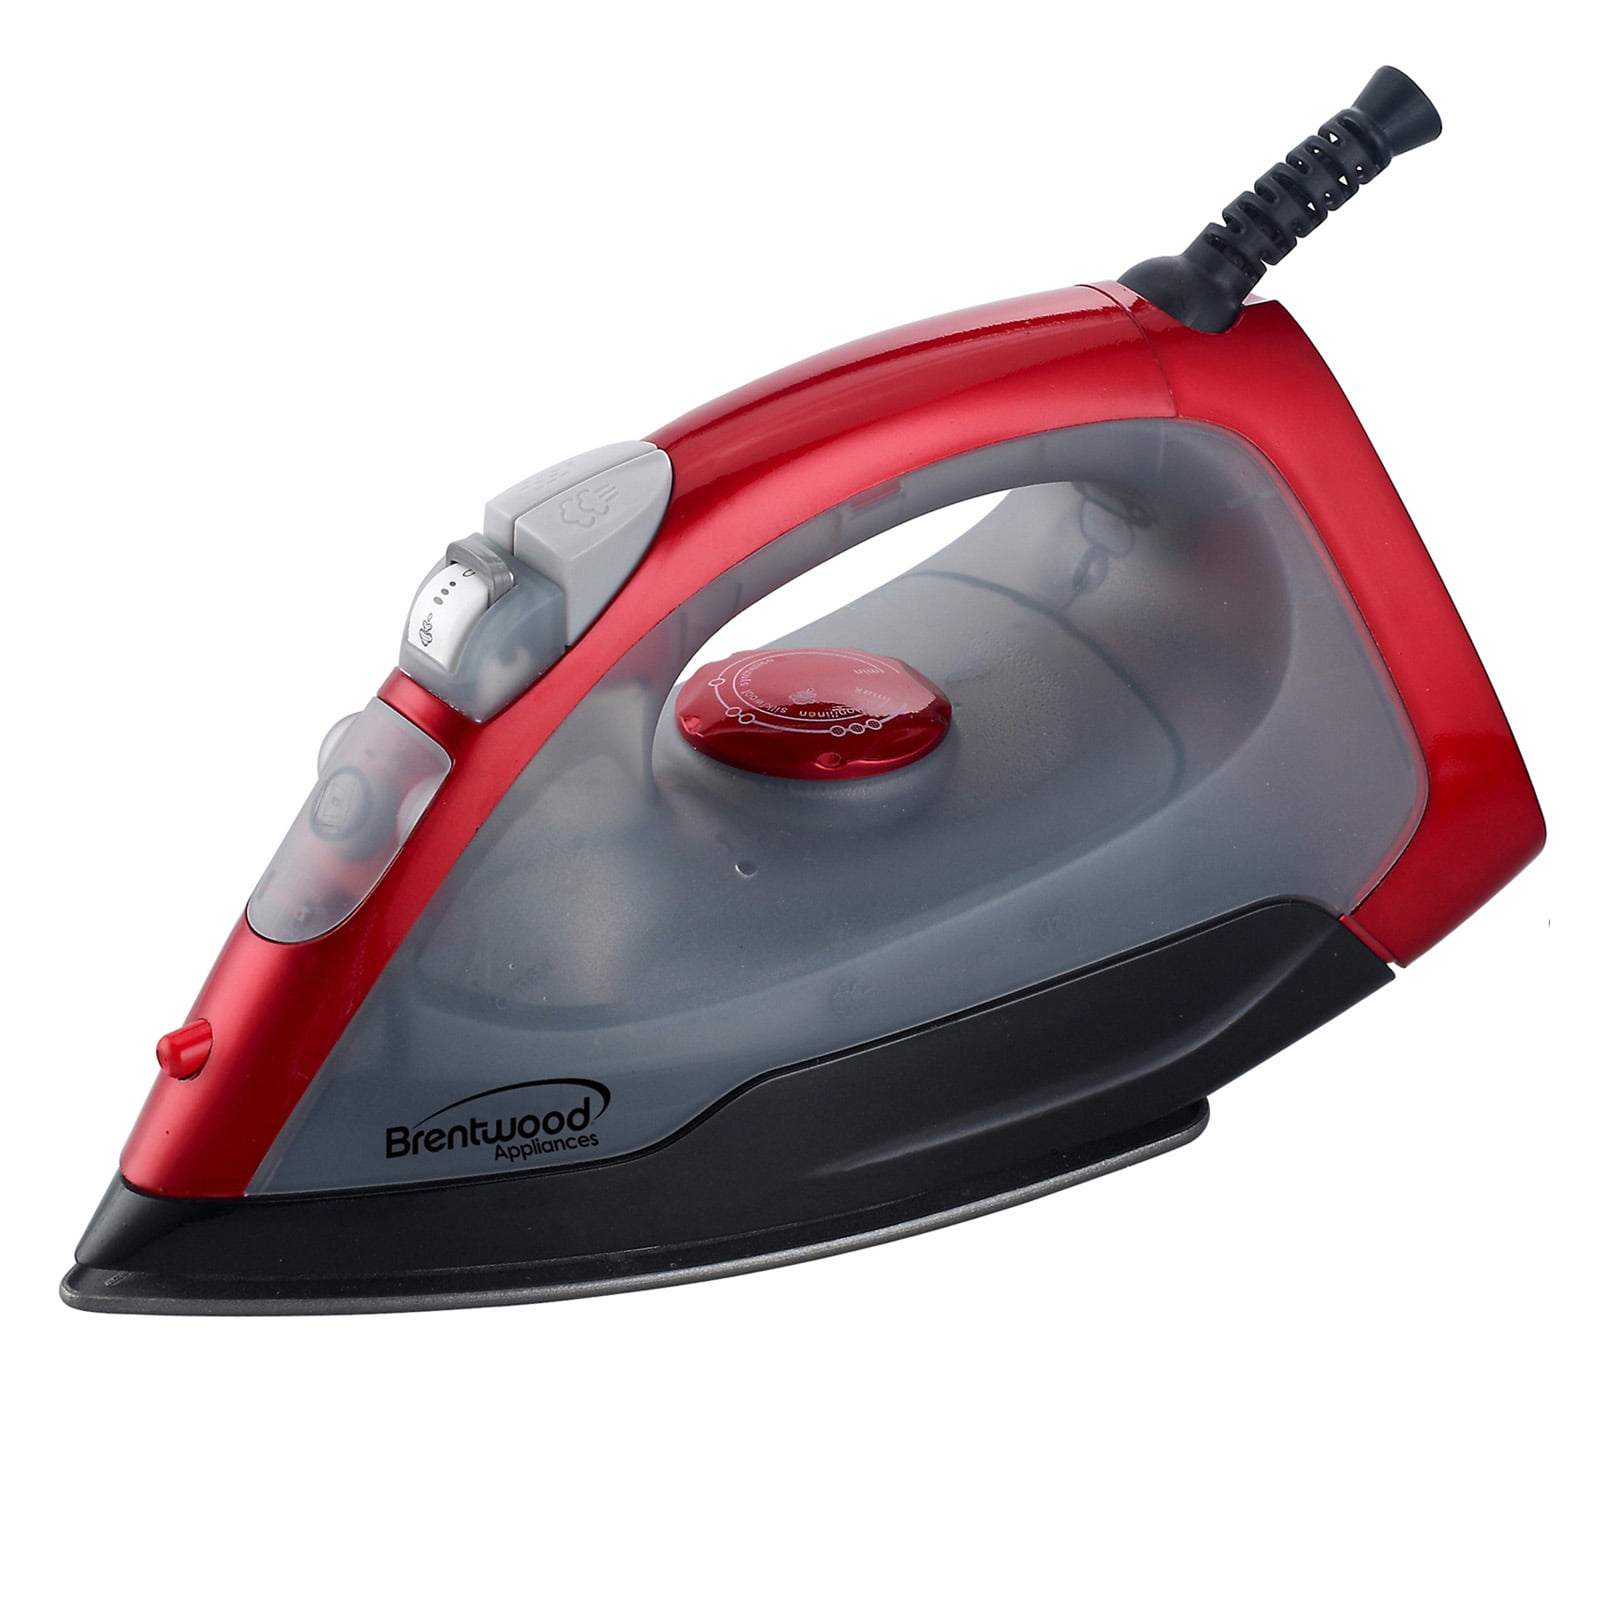 Brentwood Appliances Full Size Nonstick Steam Iron Red w/ Vertical Steam Setting 